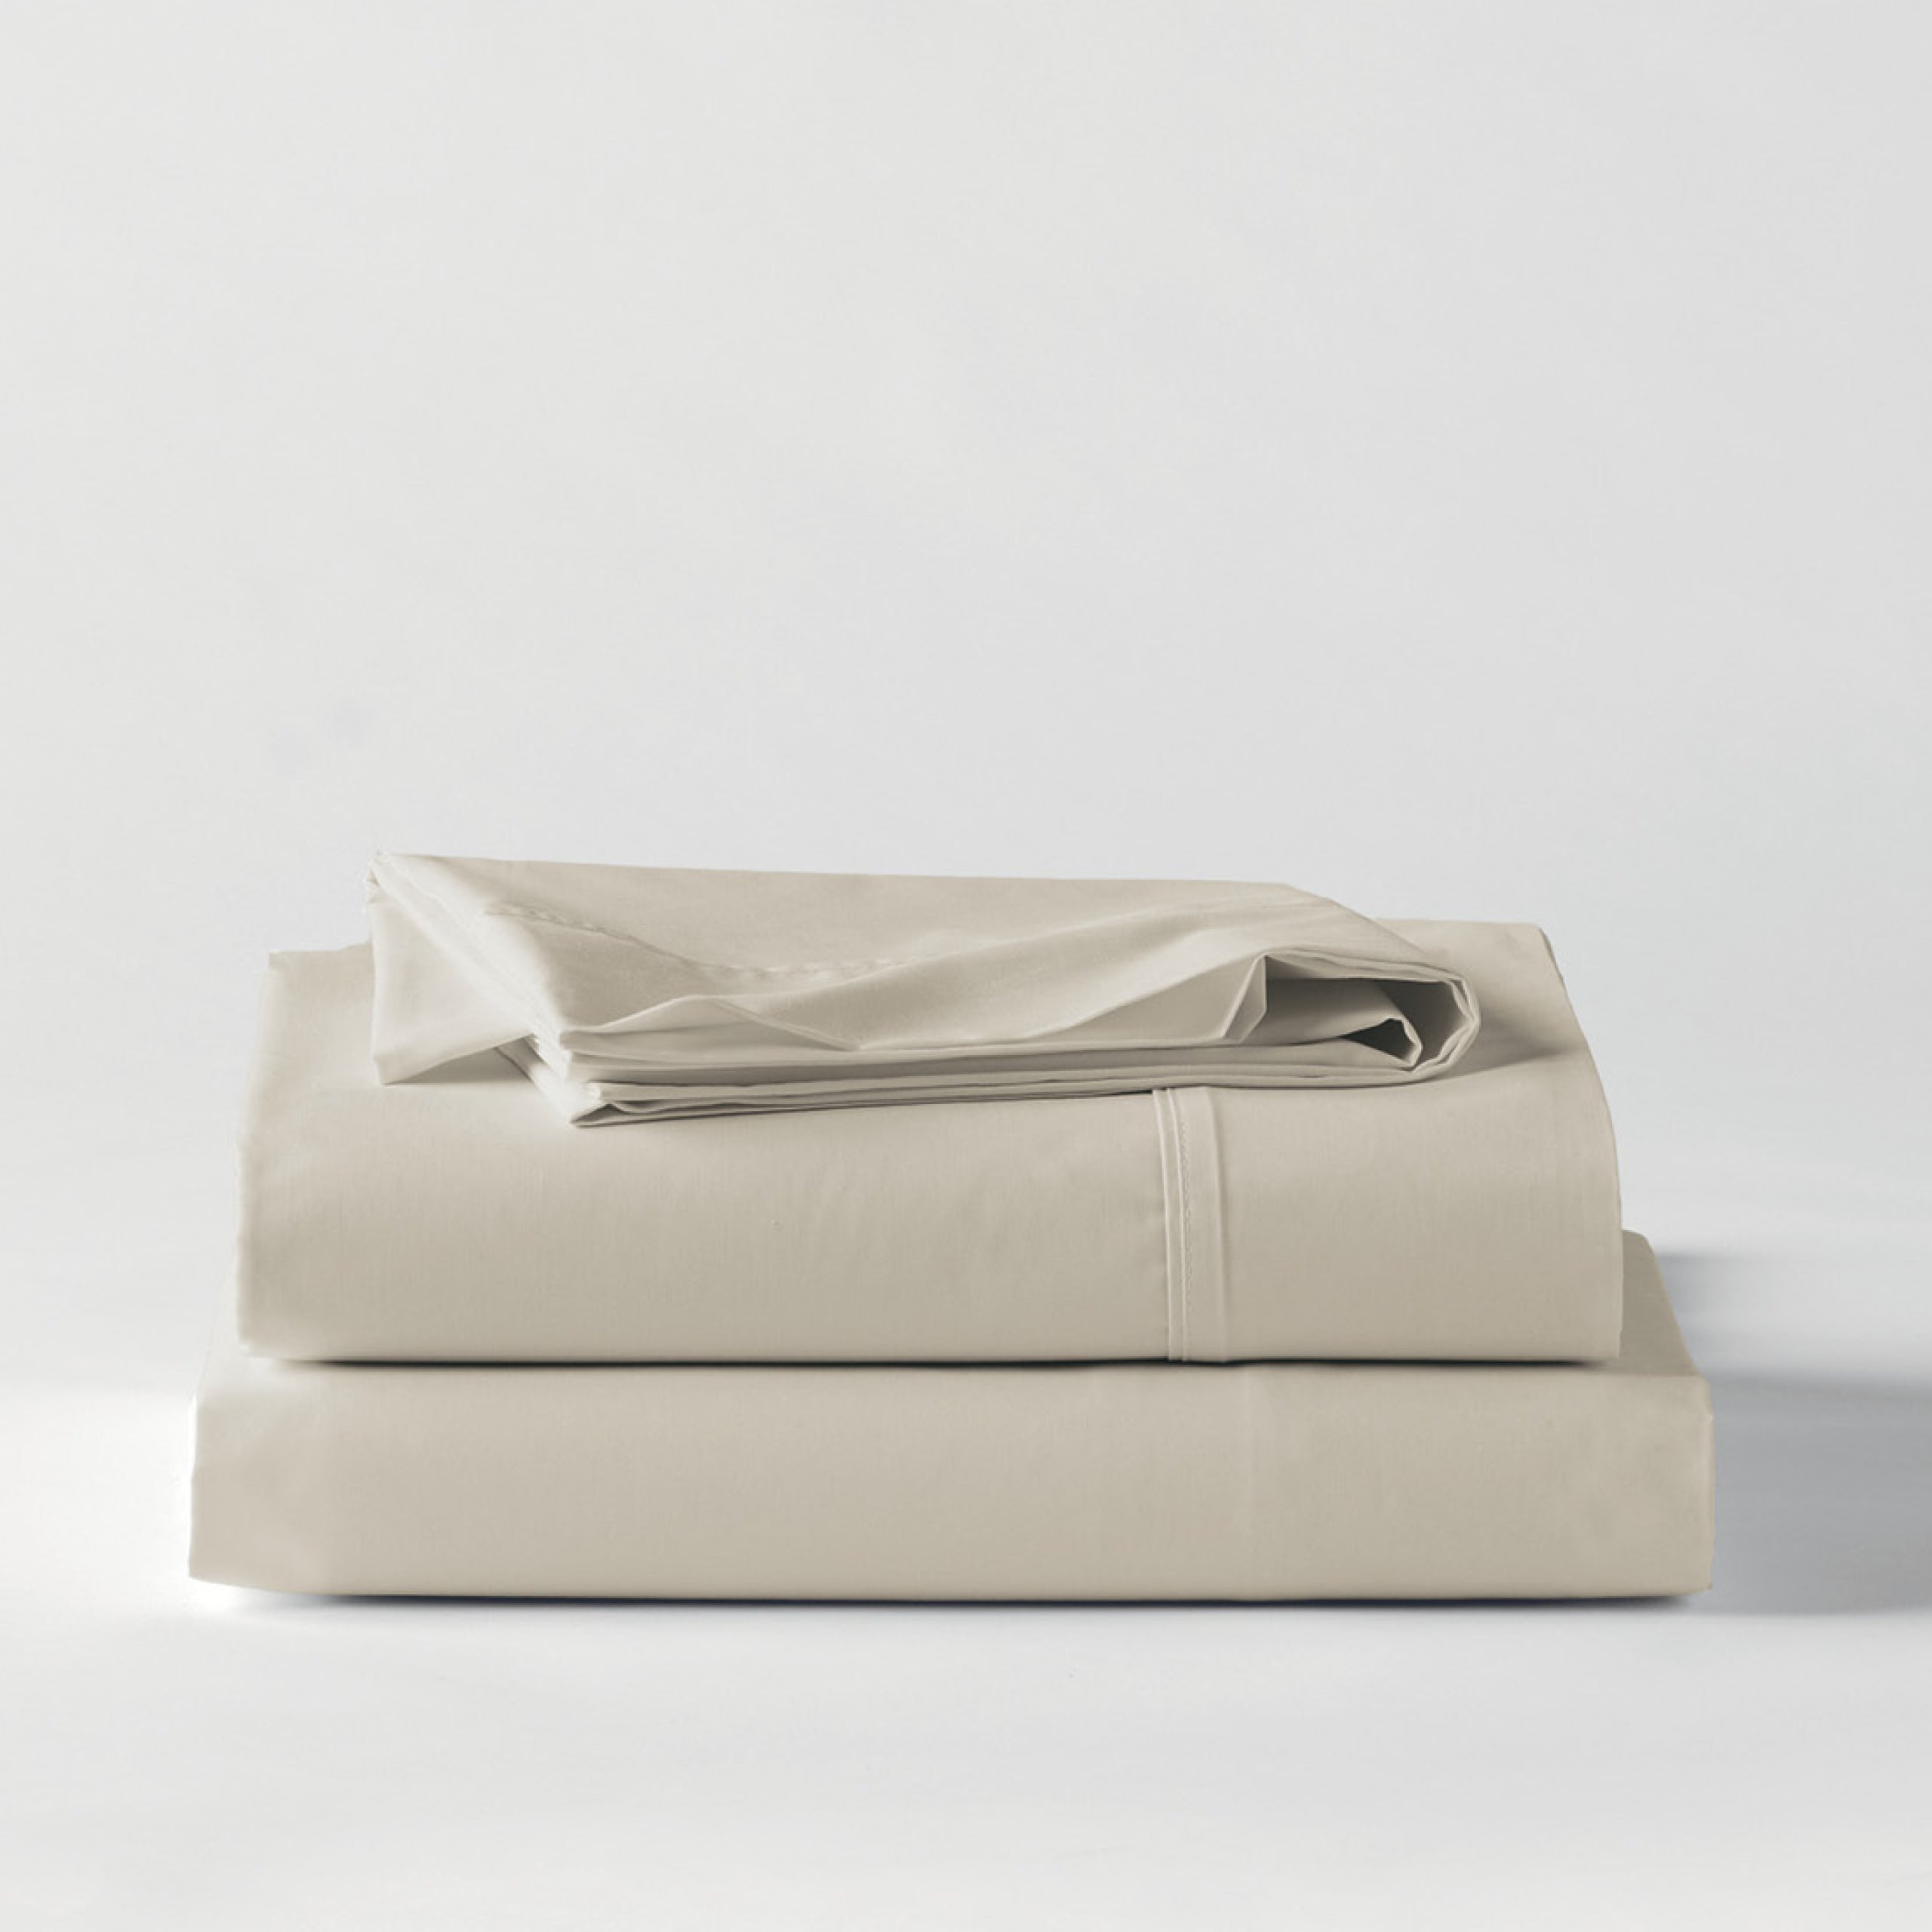 Premium Percale Oyster Sheets folded up on floor